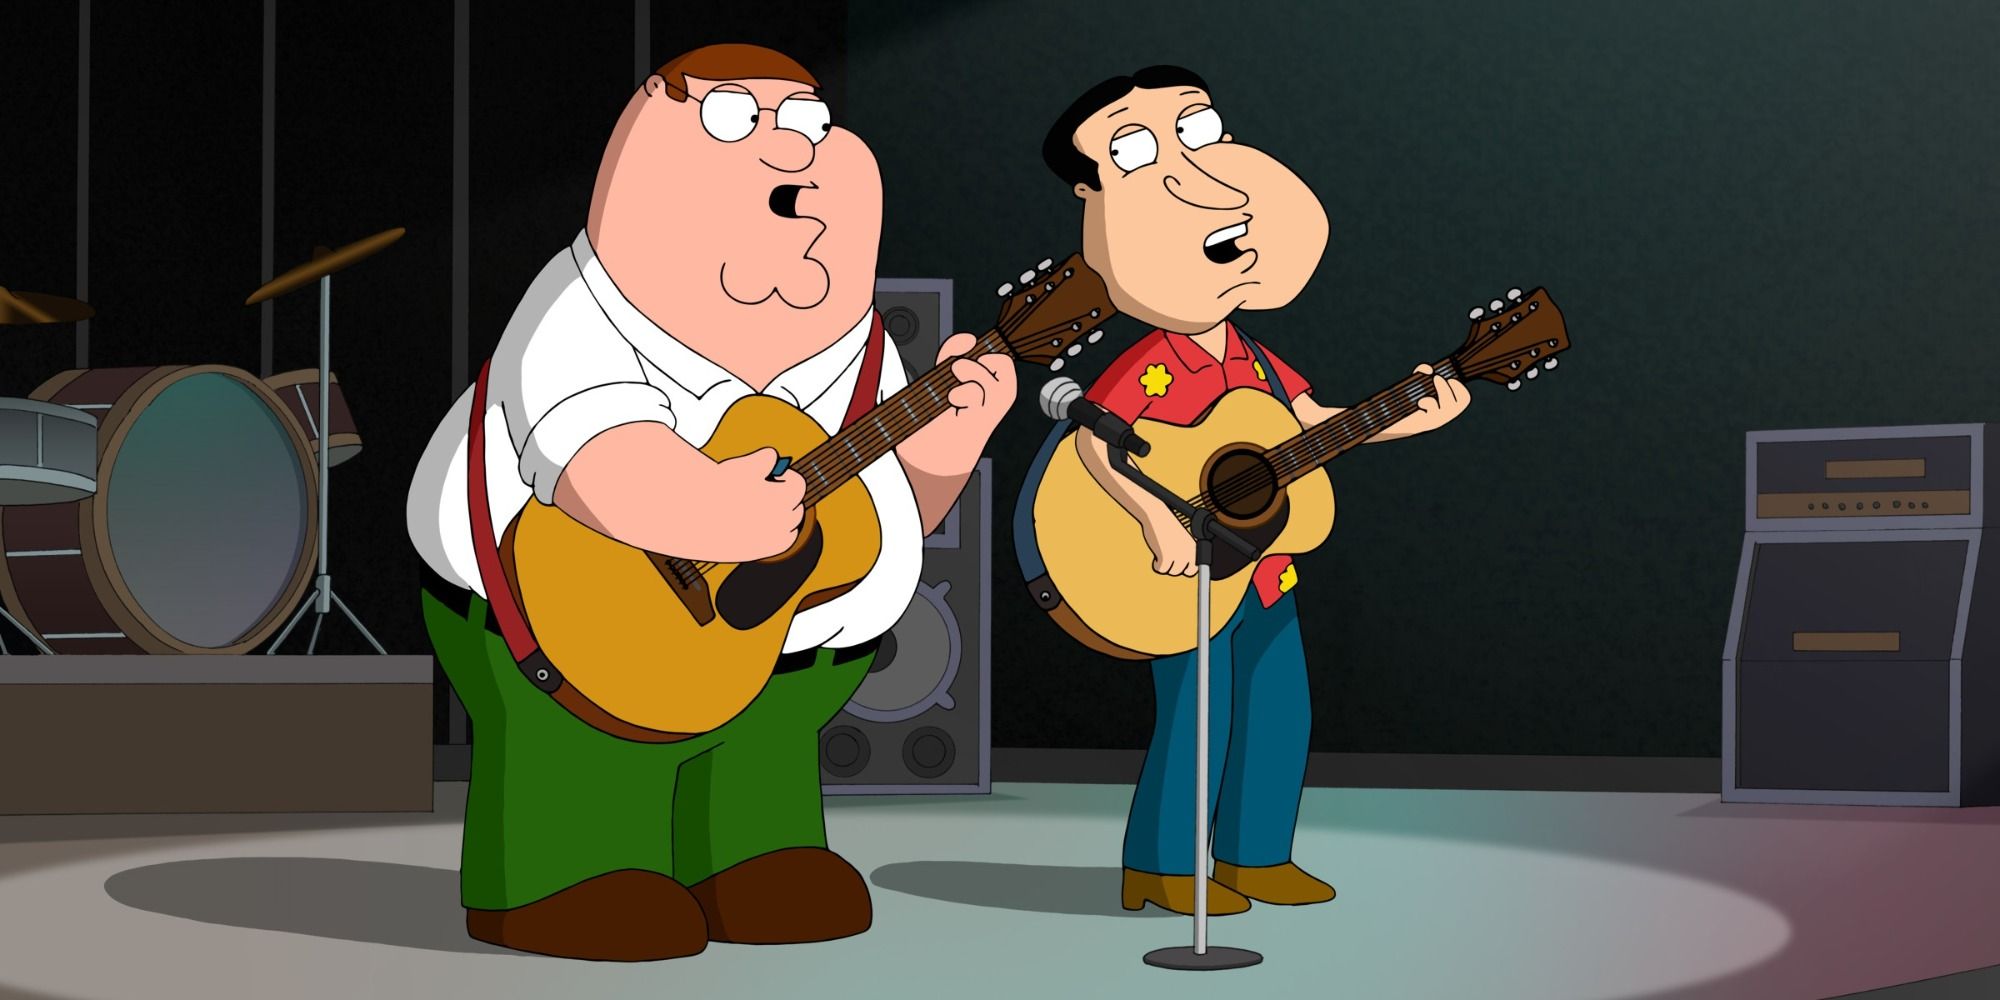 Peter and Quagmire playing guitar and singing